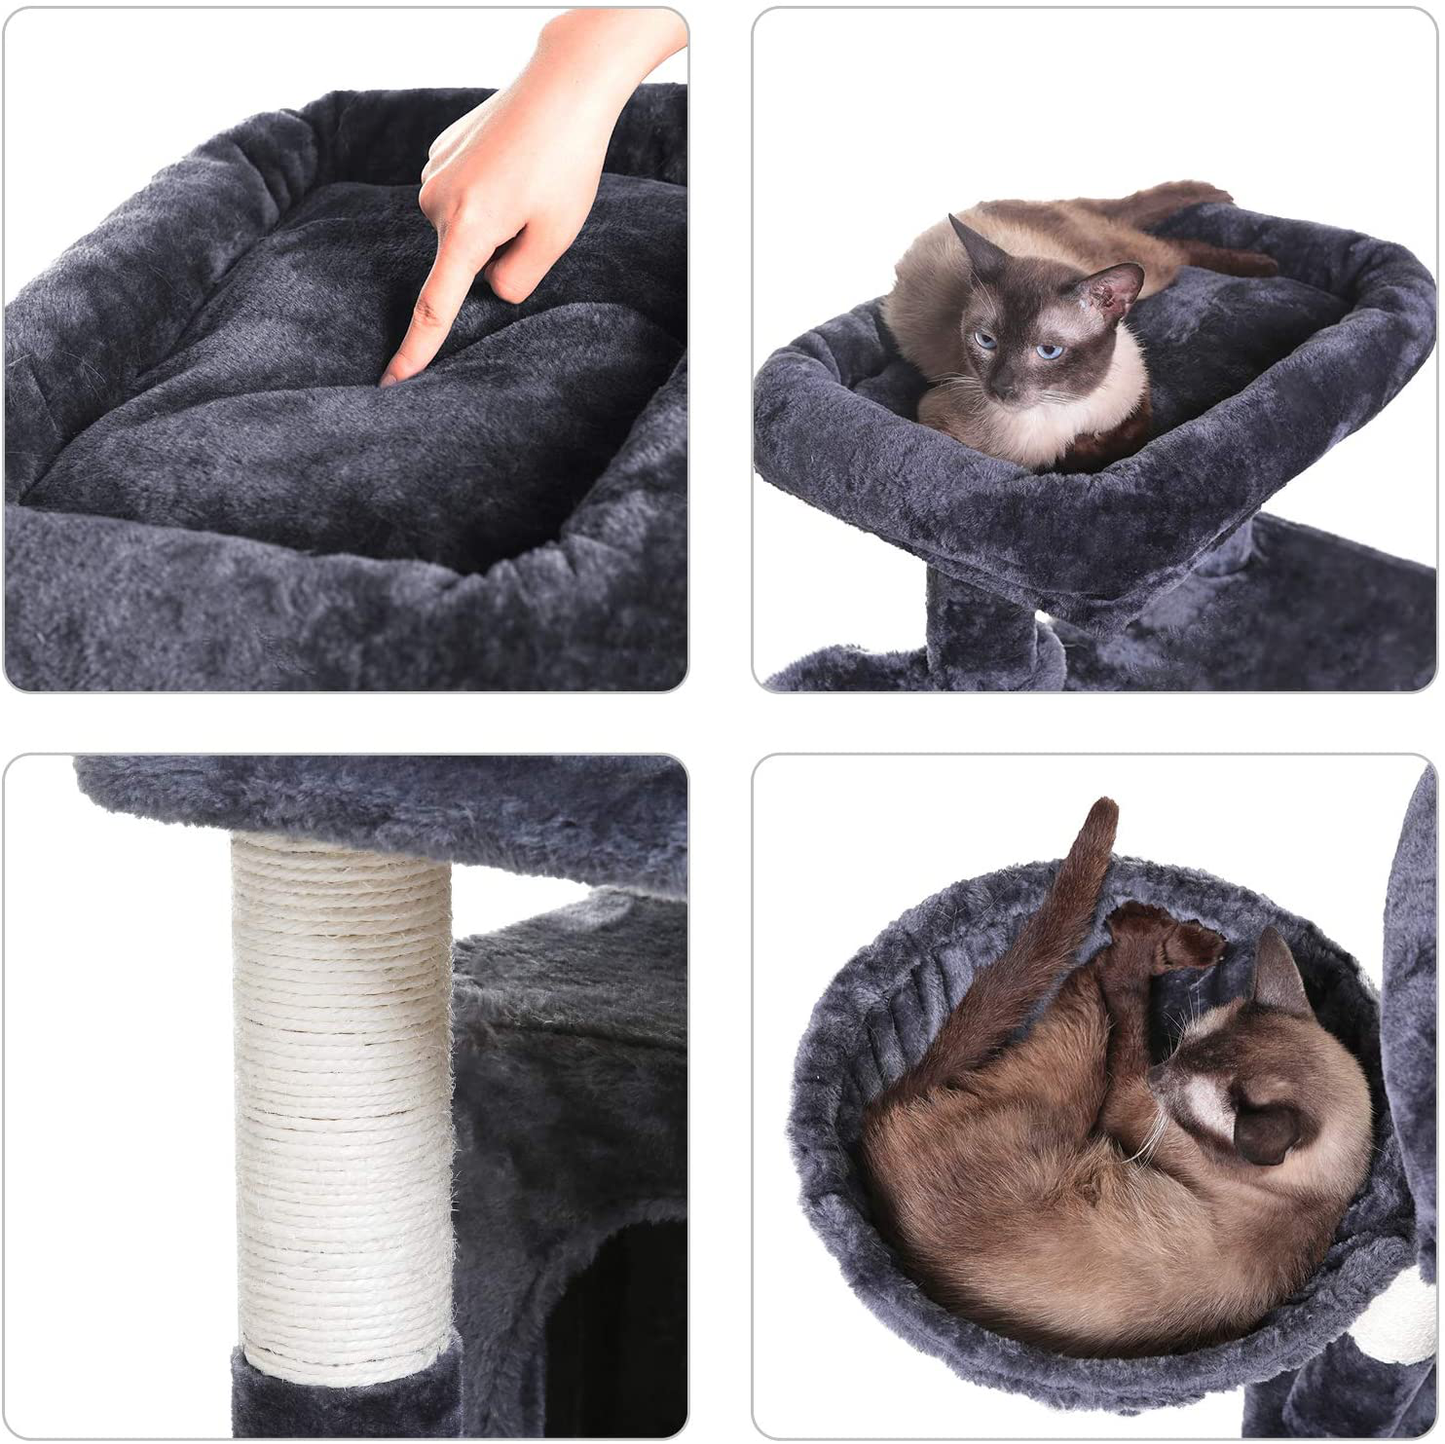 Hey-Brother 41.34 Inches Cat Tree with Scratching Board, 2 Luxury Condos, Cat Tower with Padded Plush Perch and Cozy Basket